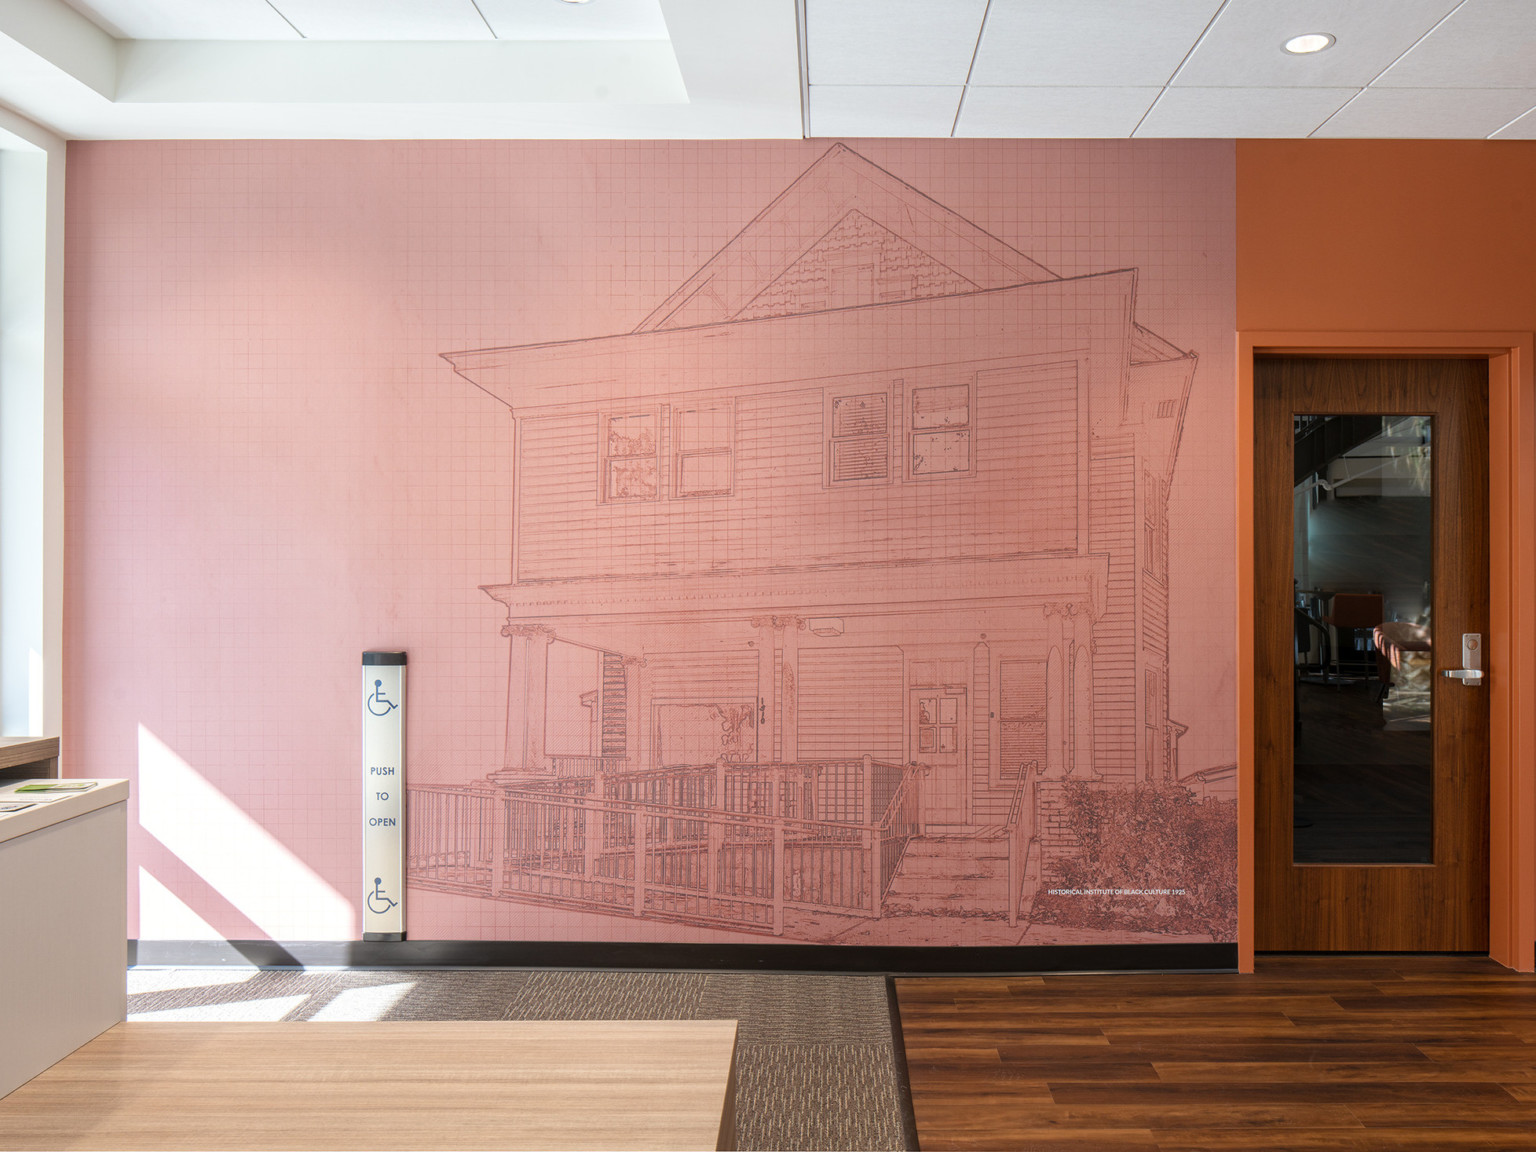 Pink mural with mural of lining drawing of a house on a grid pattern next to an orange wall and door